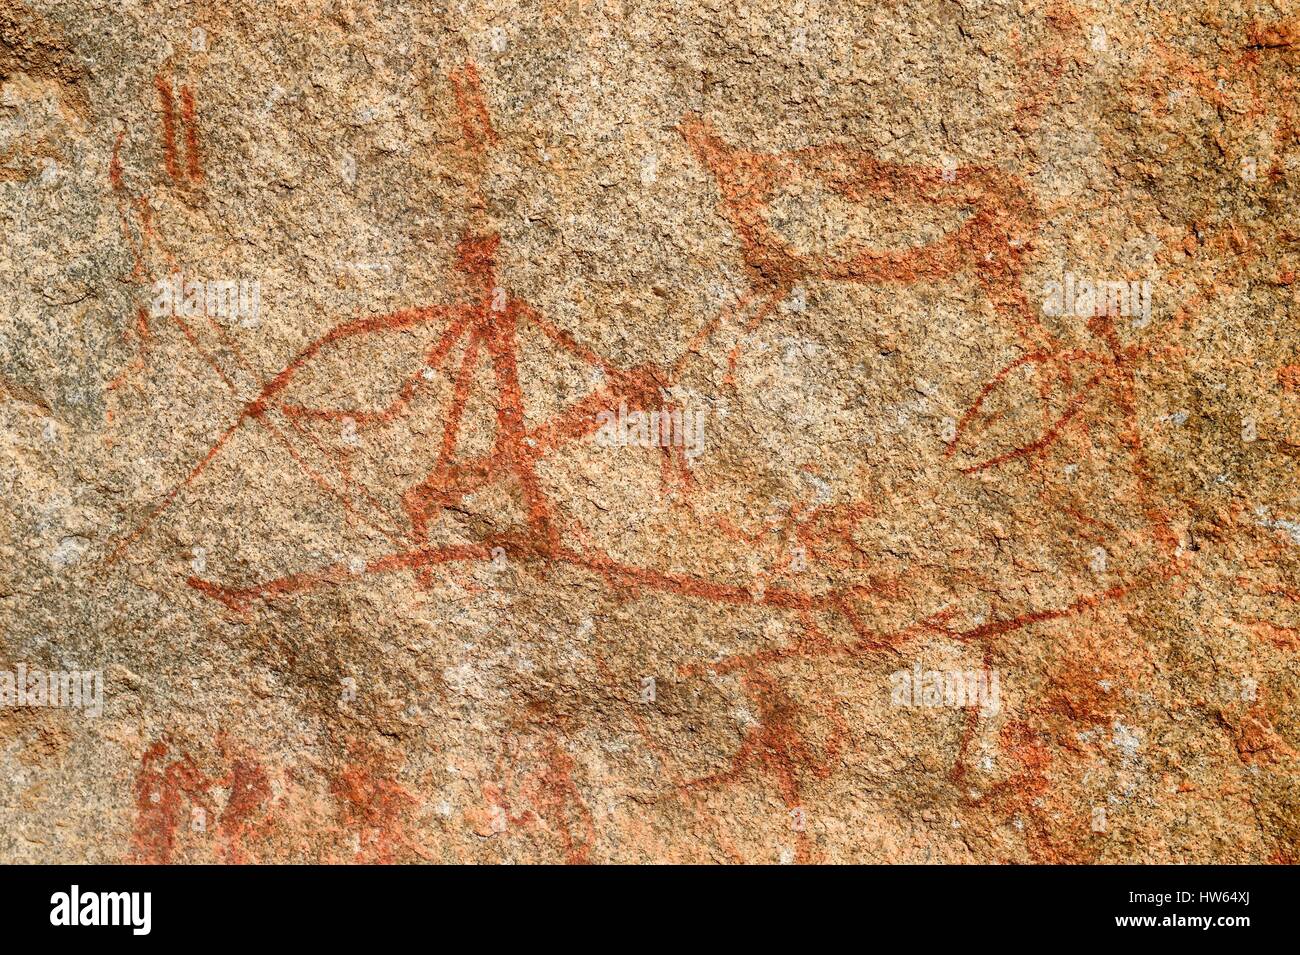 Zimbabwe, Matabeleland South Province, Matobo or Matopos Hills National Park, listed as World Heritage by UNESCO, rock paintings Stock Photo